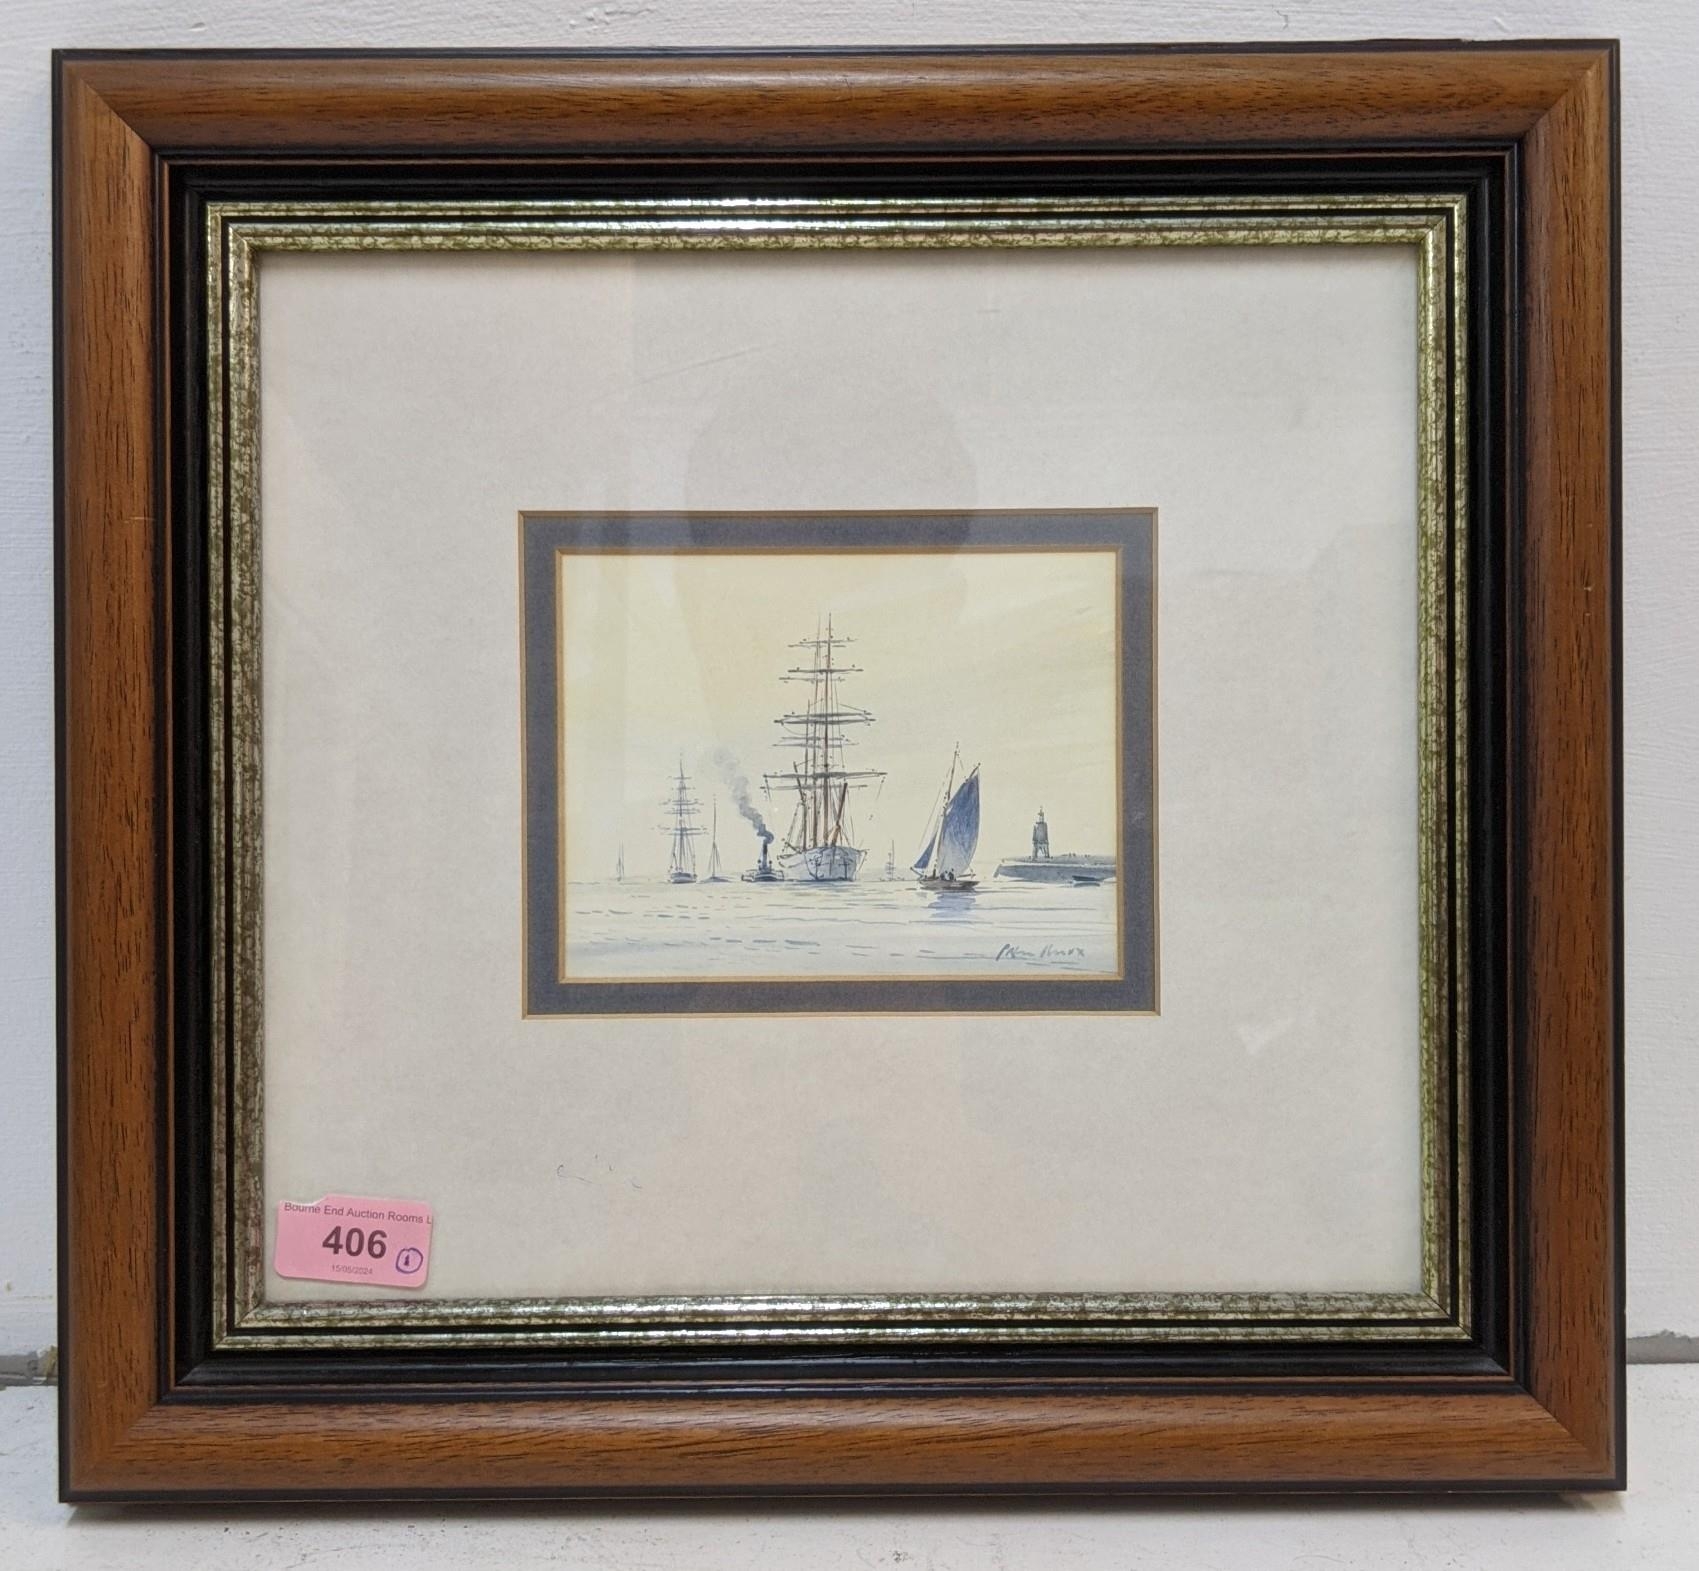 A watercolour on board depicting two tall shops and a smaller yacht near a harbour, signature 'peter